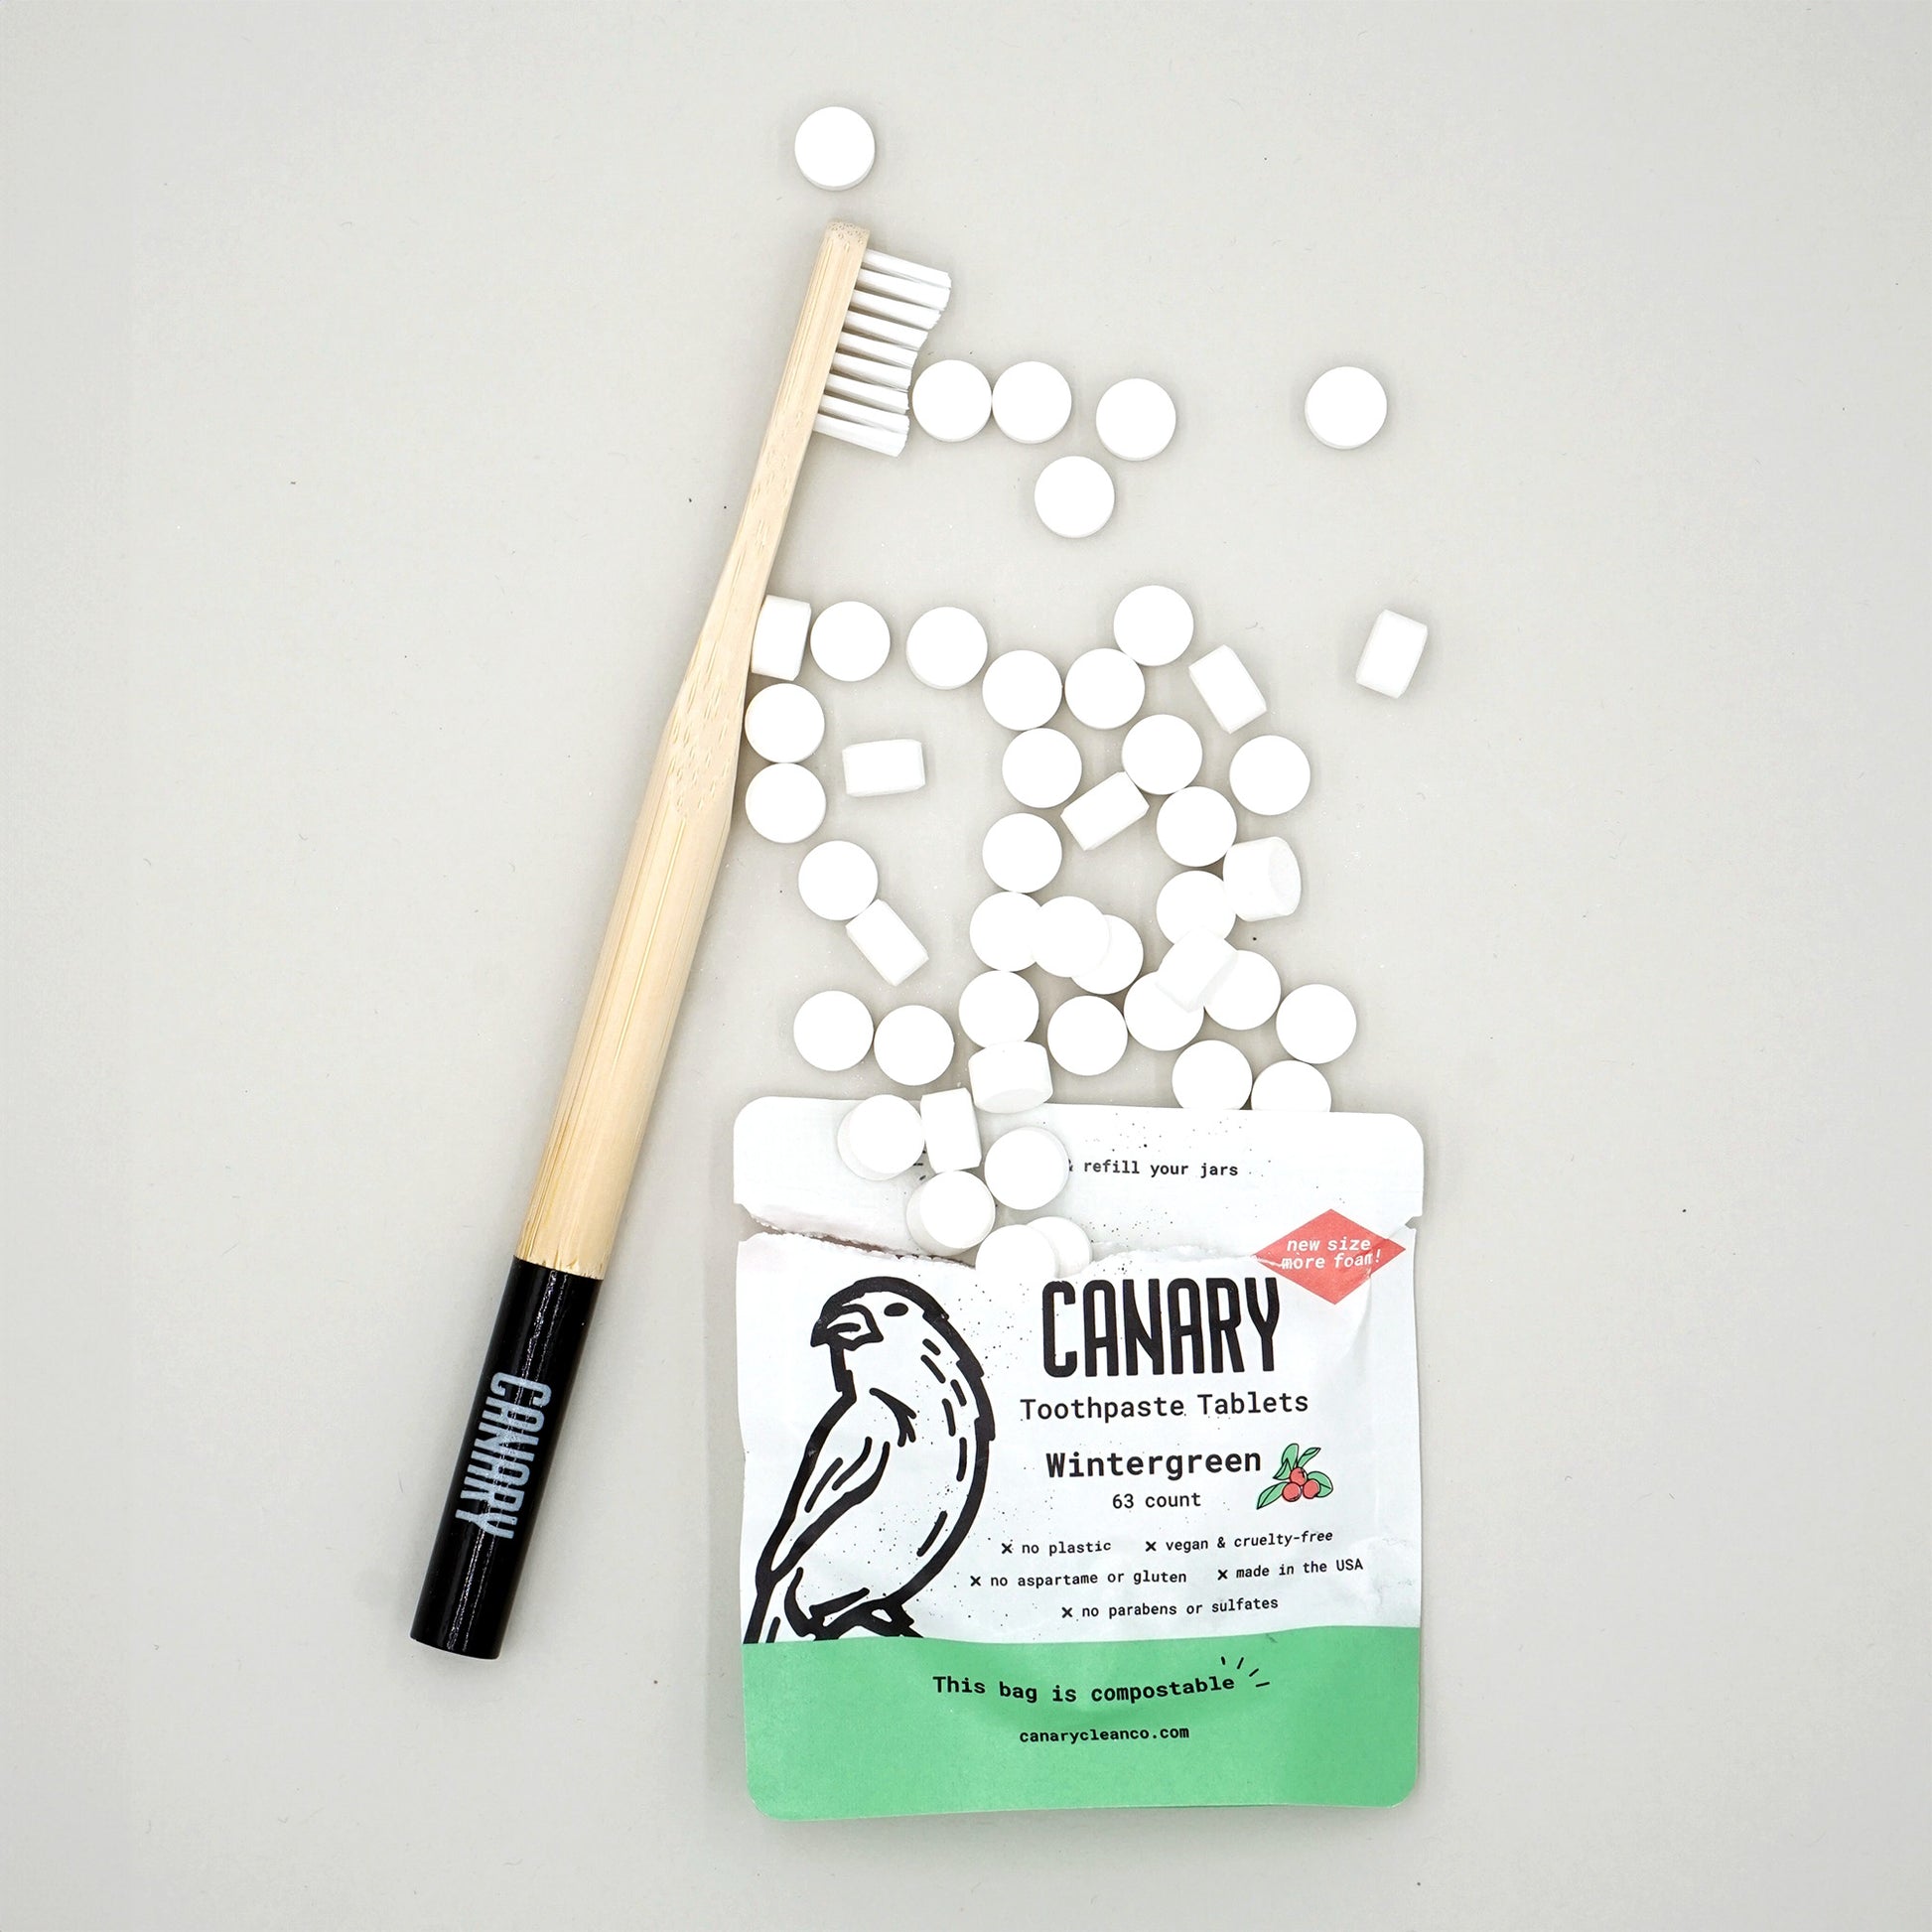 Canary Wintergreen Toothpaste Tablets, sample size 63 count compostable pouch, front view of the pouch with tablets spilling out  and with Canary toothbrush